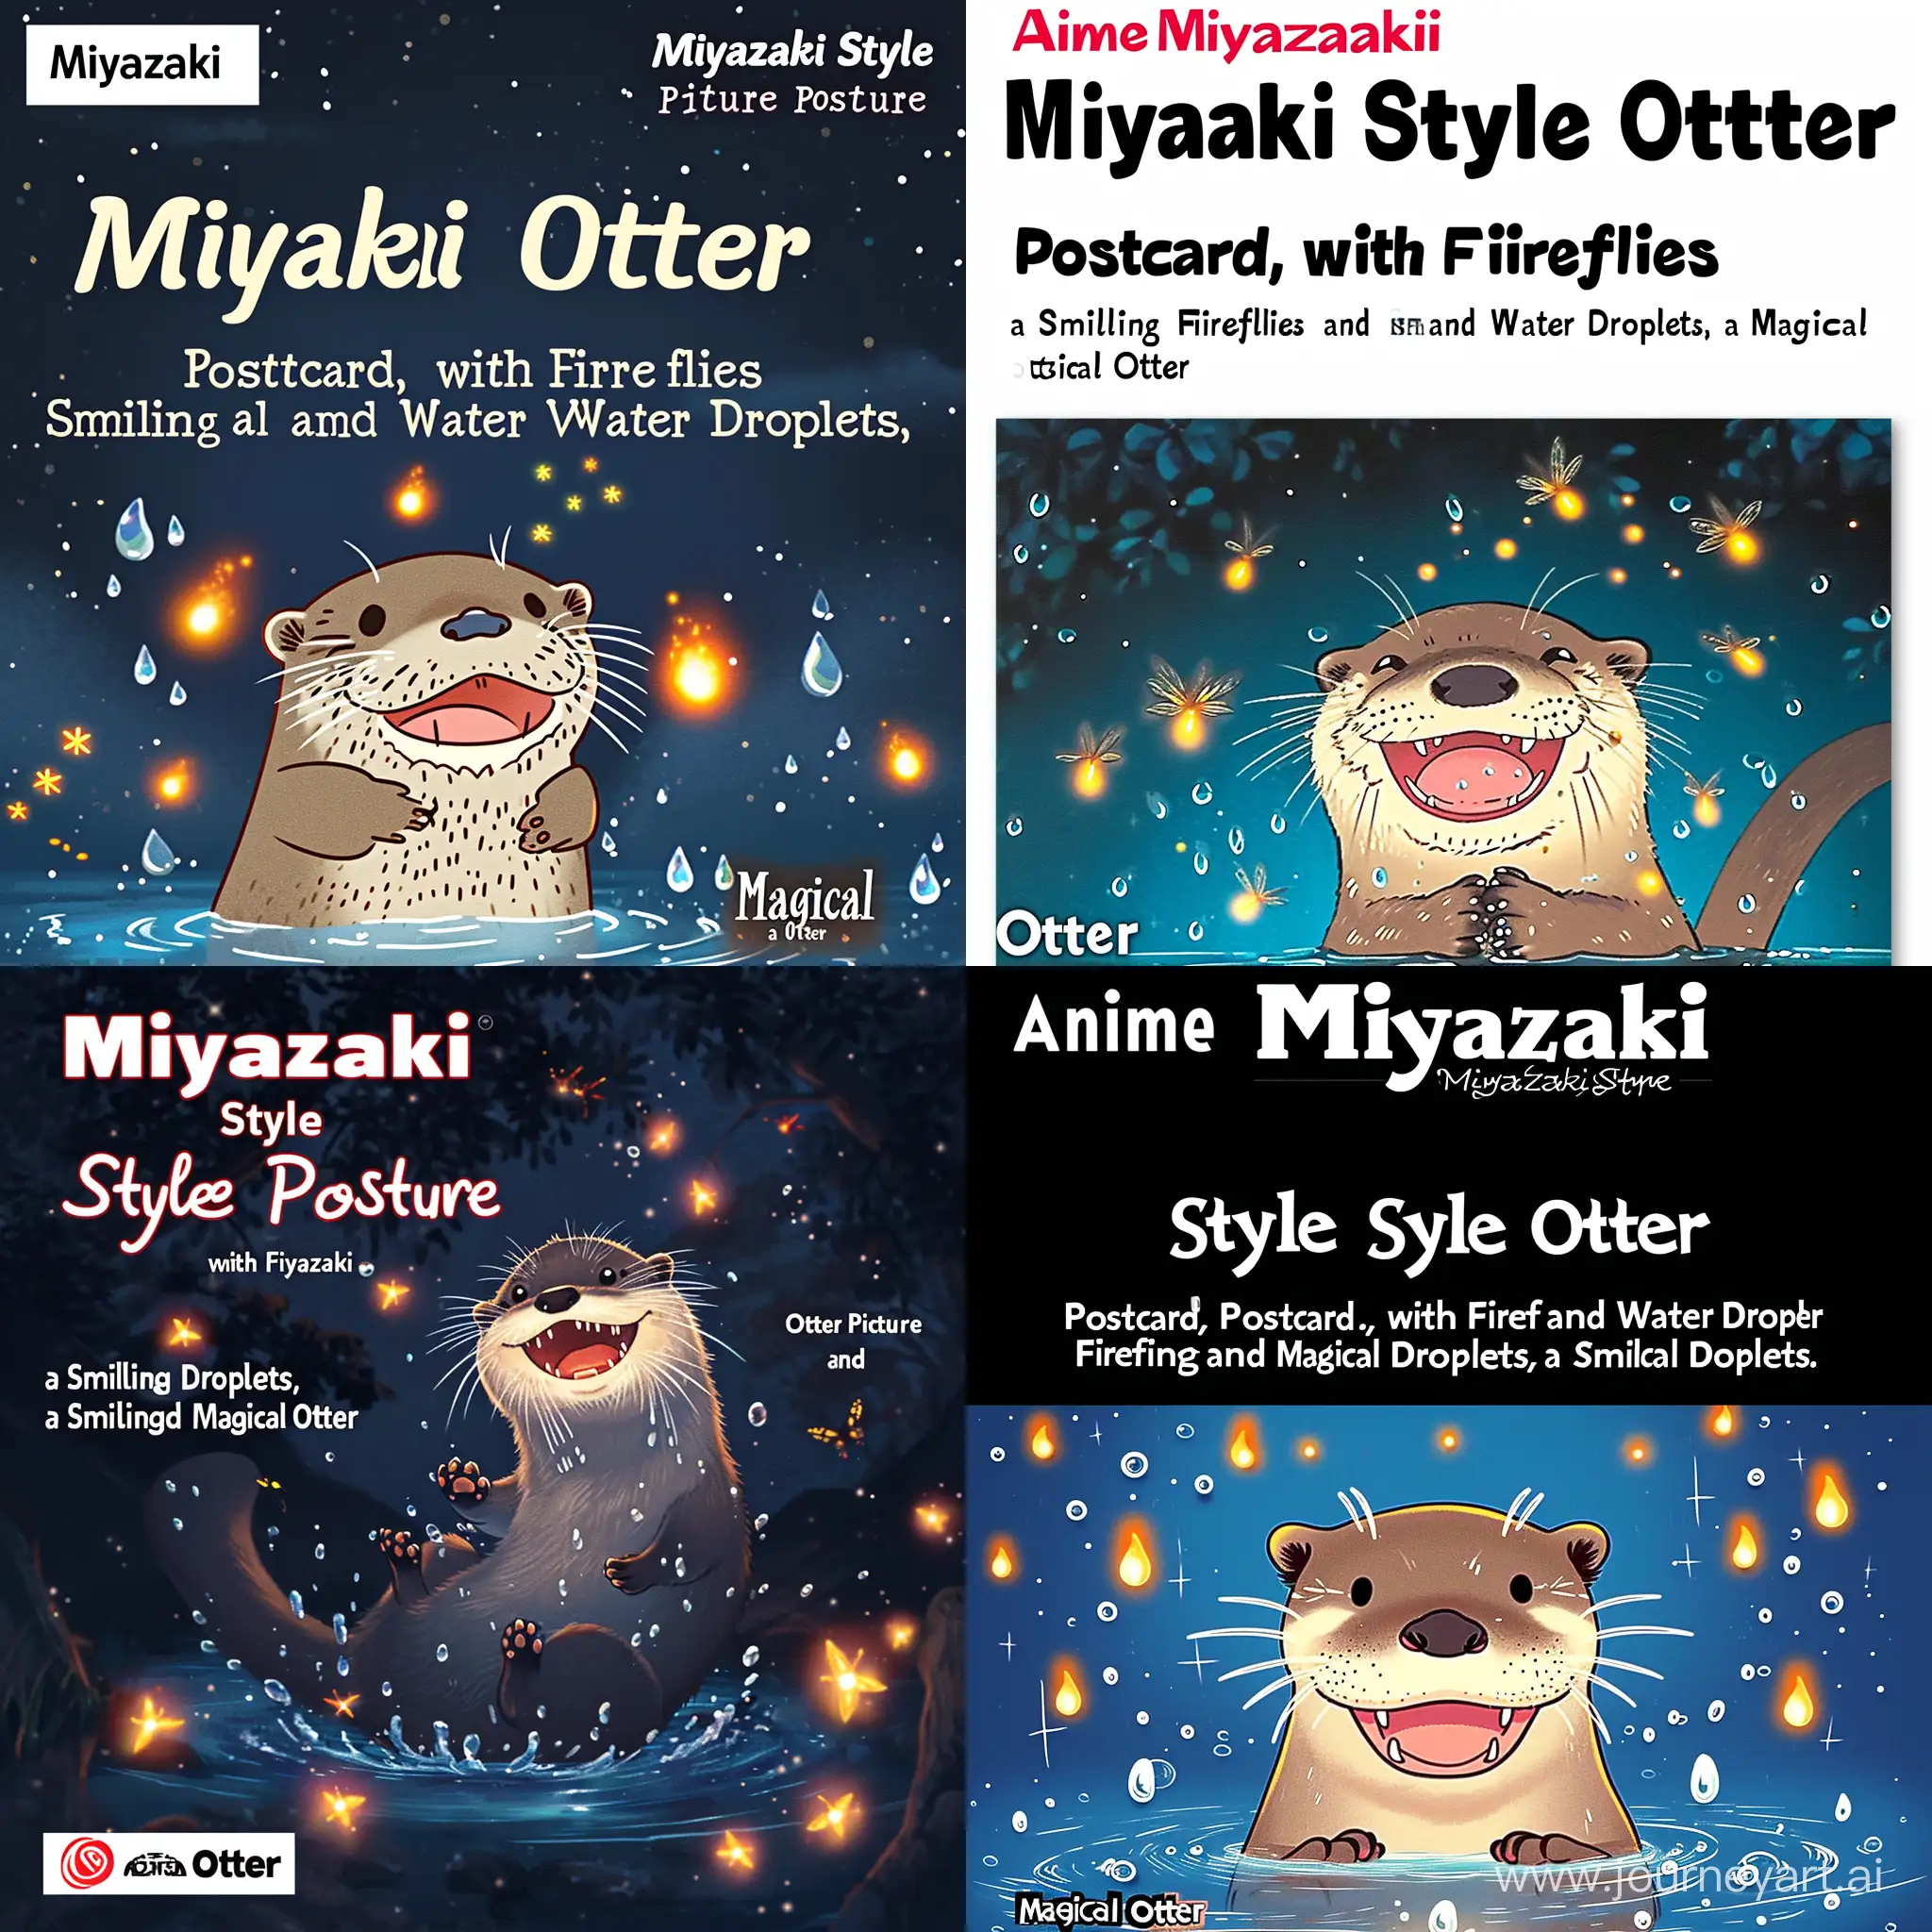 Magical-Otter-in-Anime-Miyazaki-Style-with-Fireflies-and-Water-Droplets